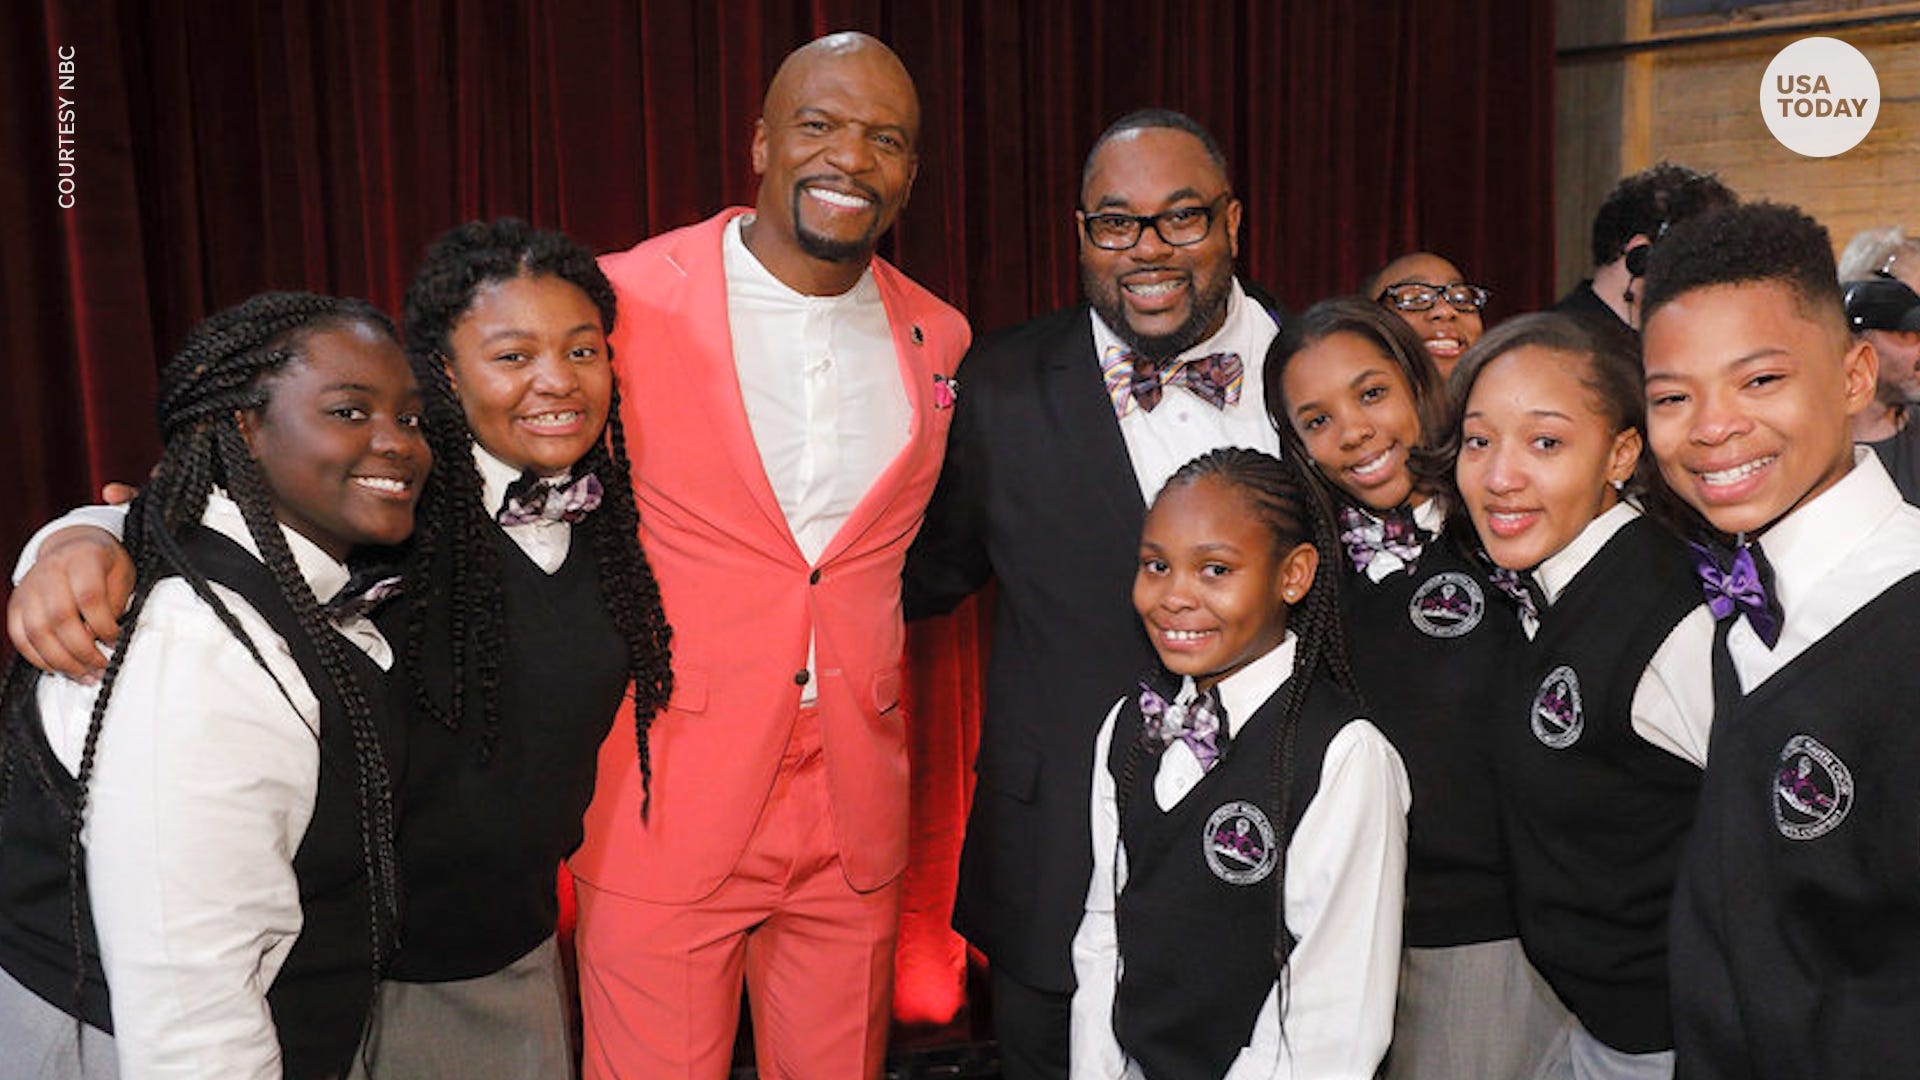 AGT Host Terry Crews Gives Golden Buzzer to ‘Groundbreaking’ Detroit Youth Choir